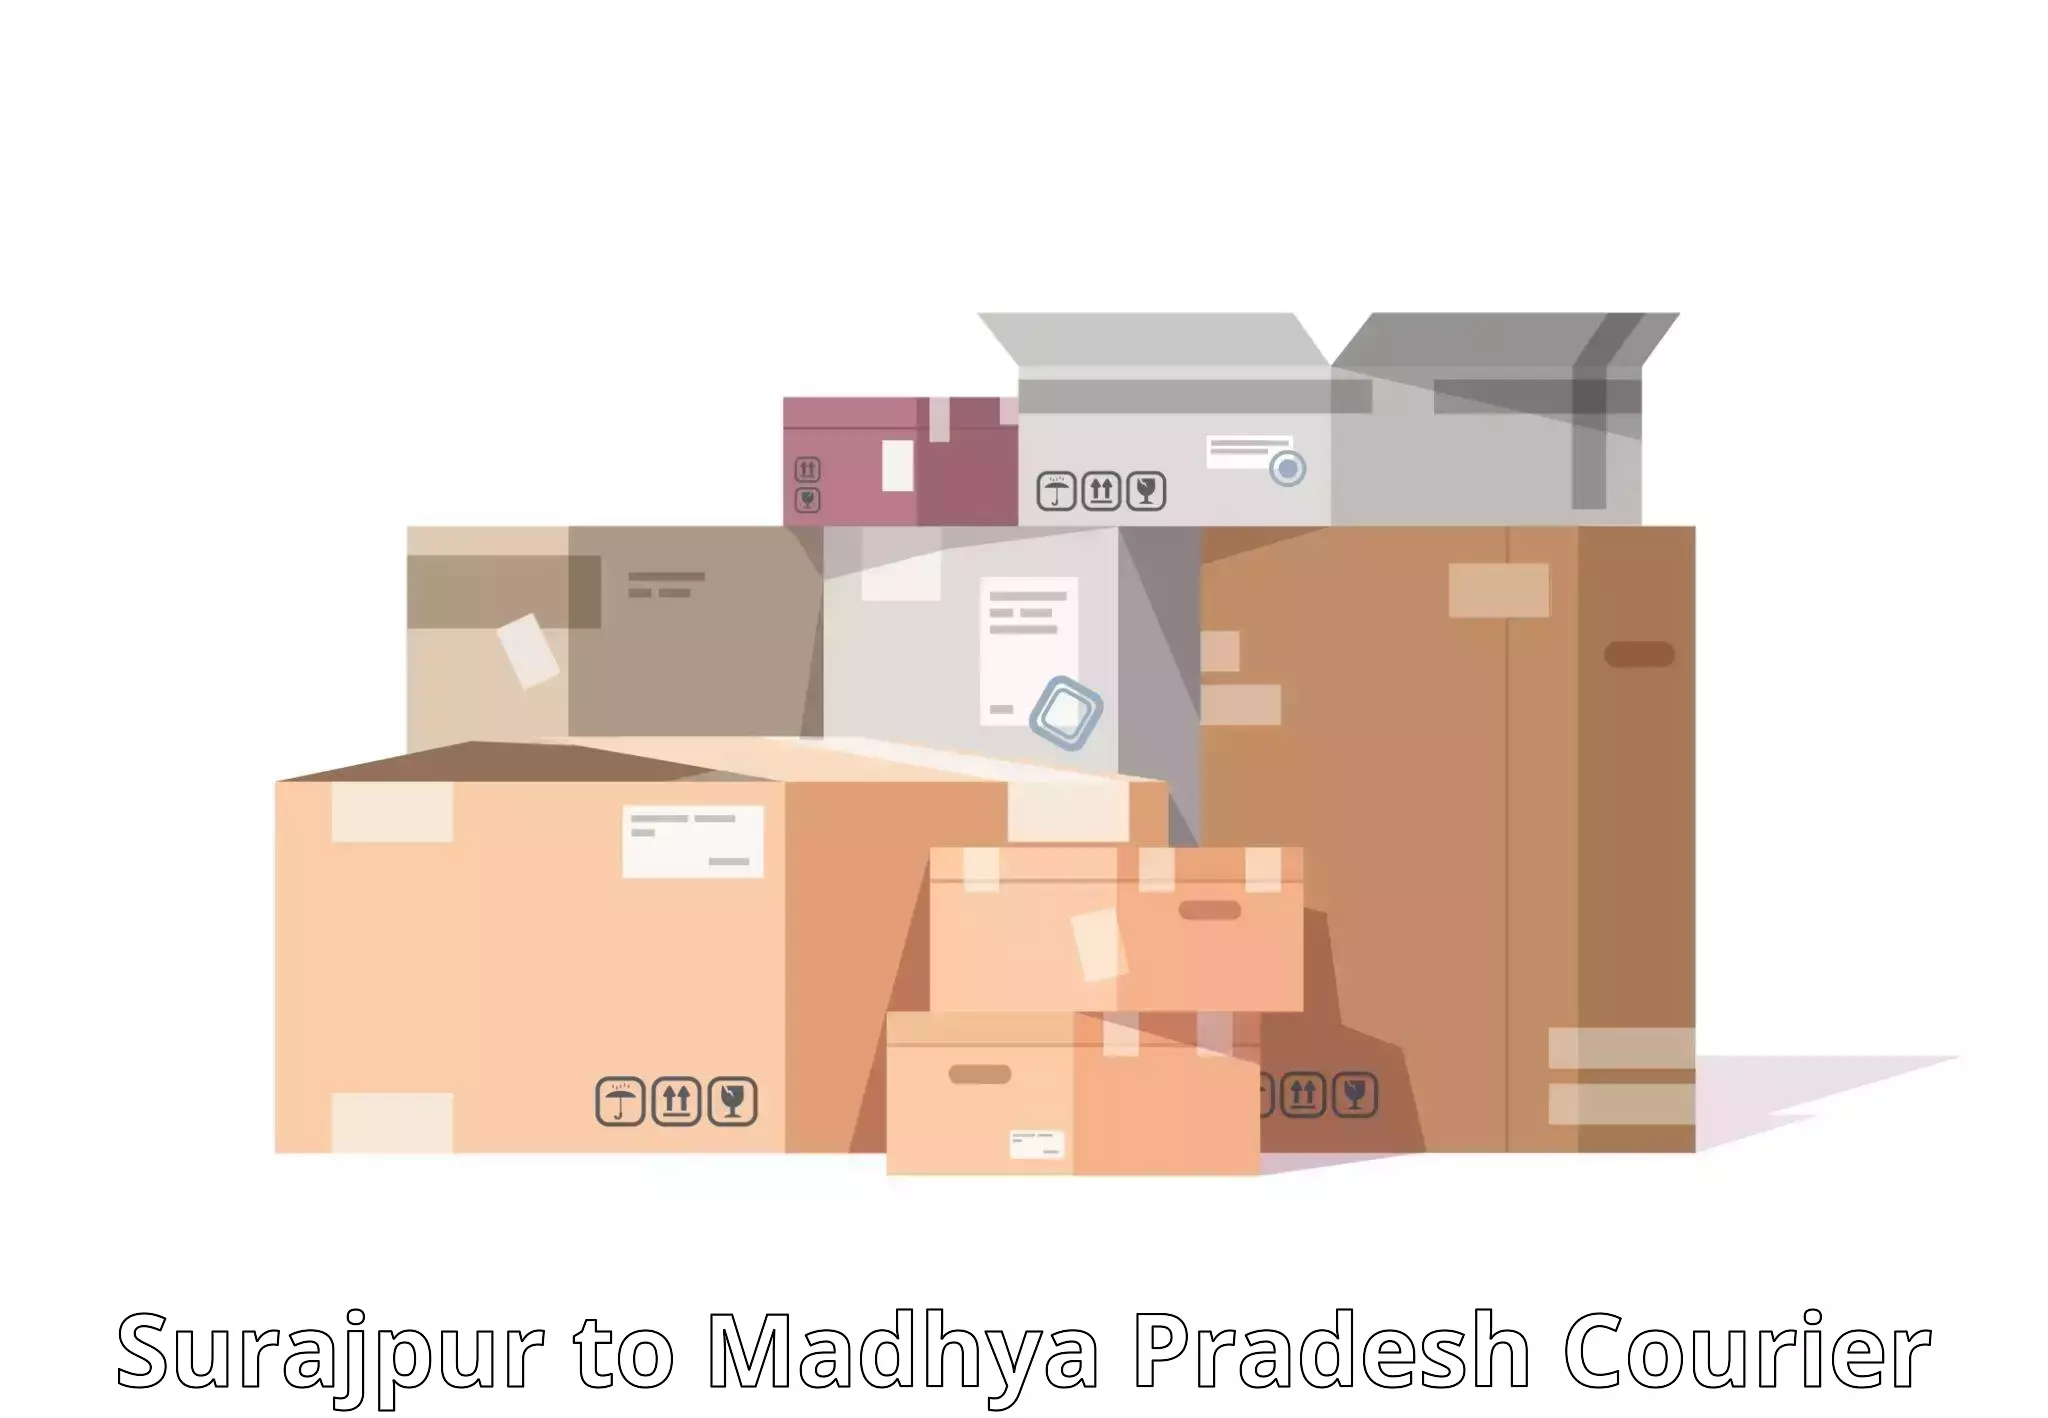 Large package courier Surajpur to Garoth